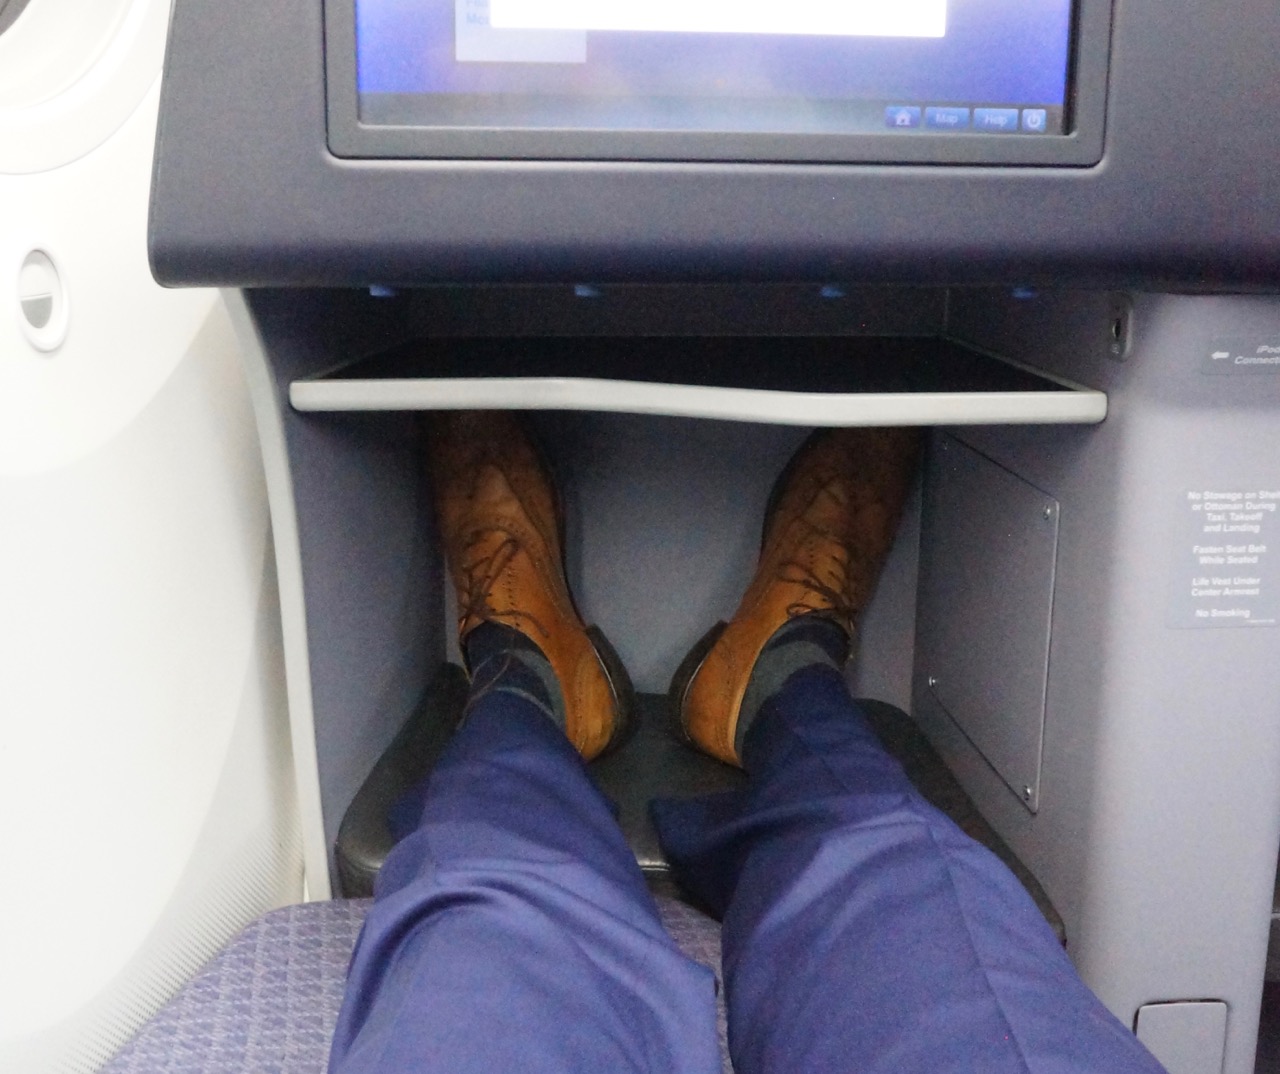 Polaris business class seats United Airlines Boeing 787 Dreamliner